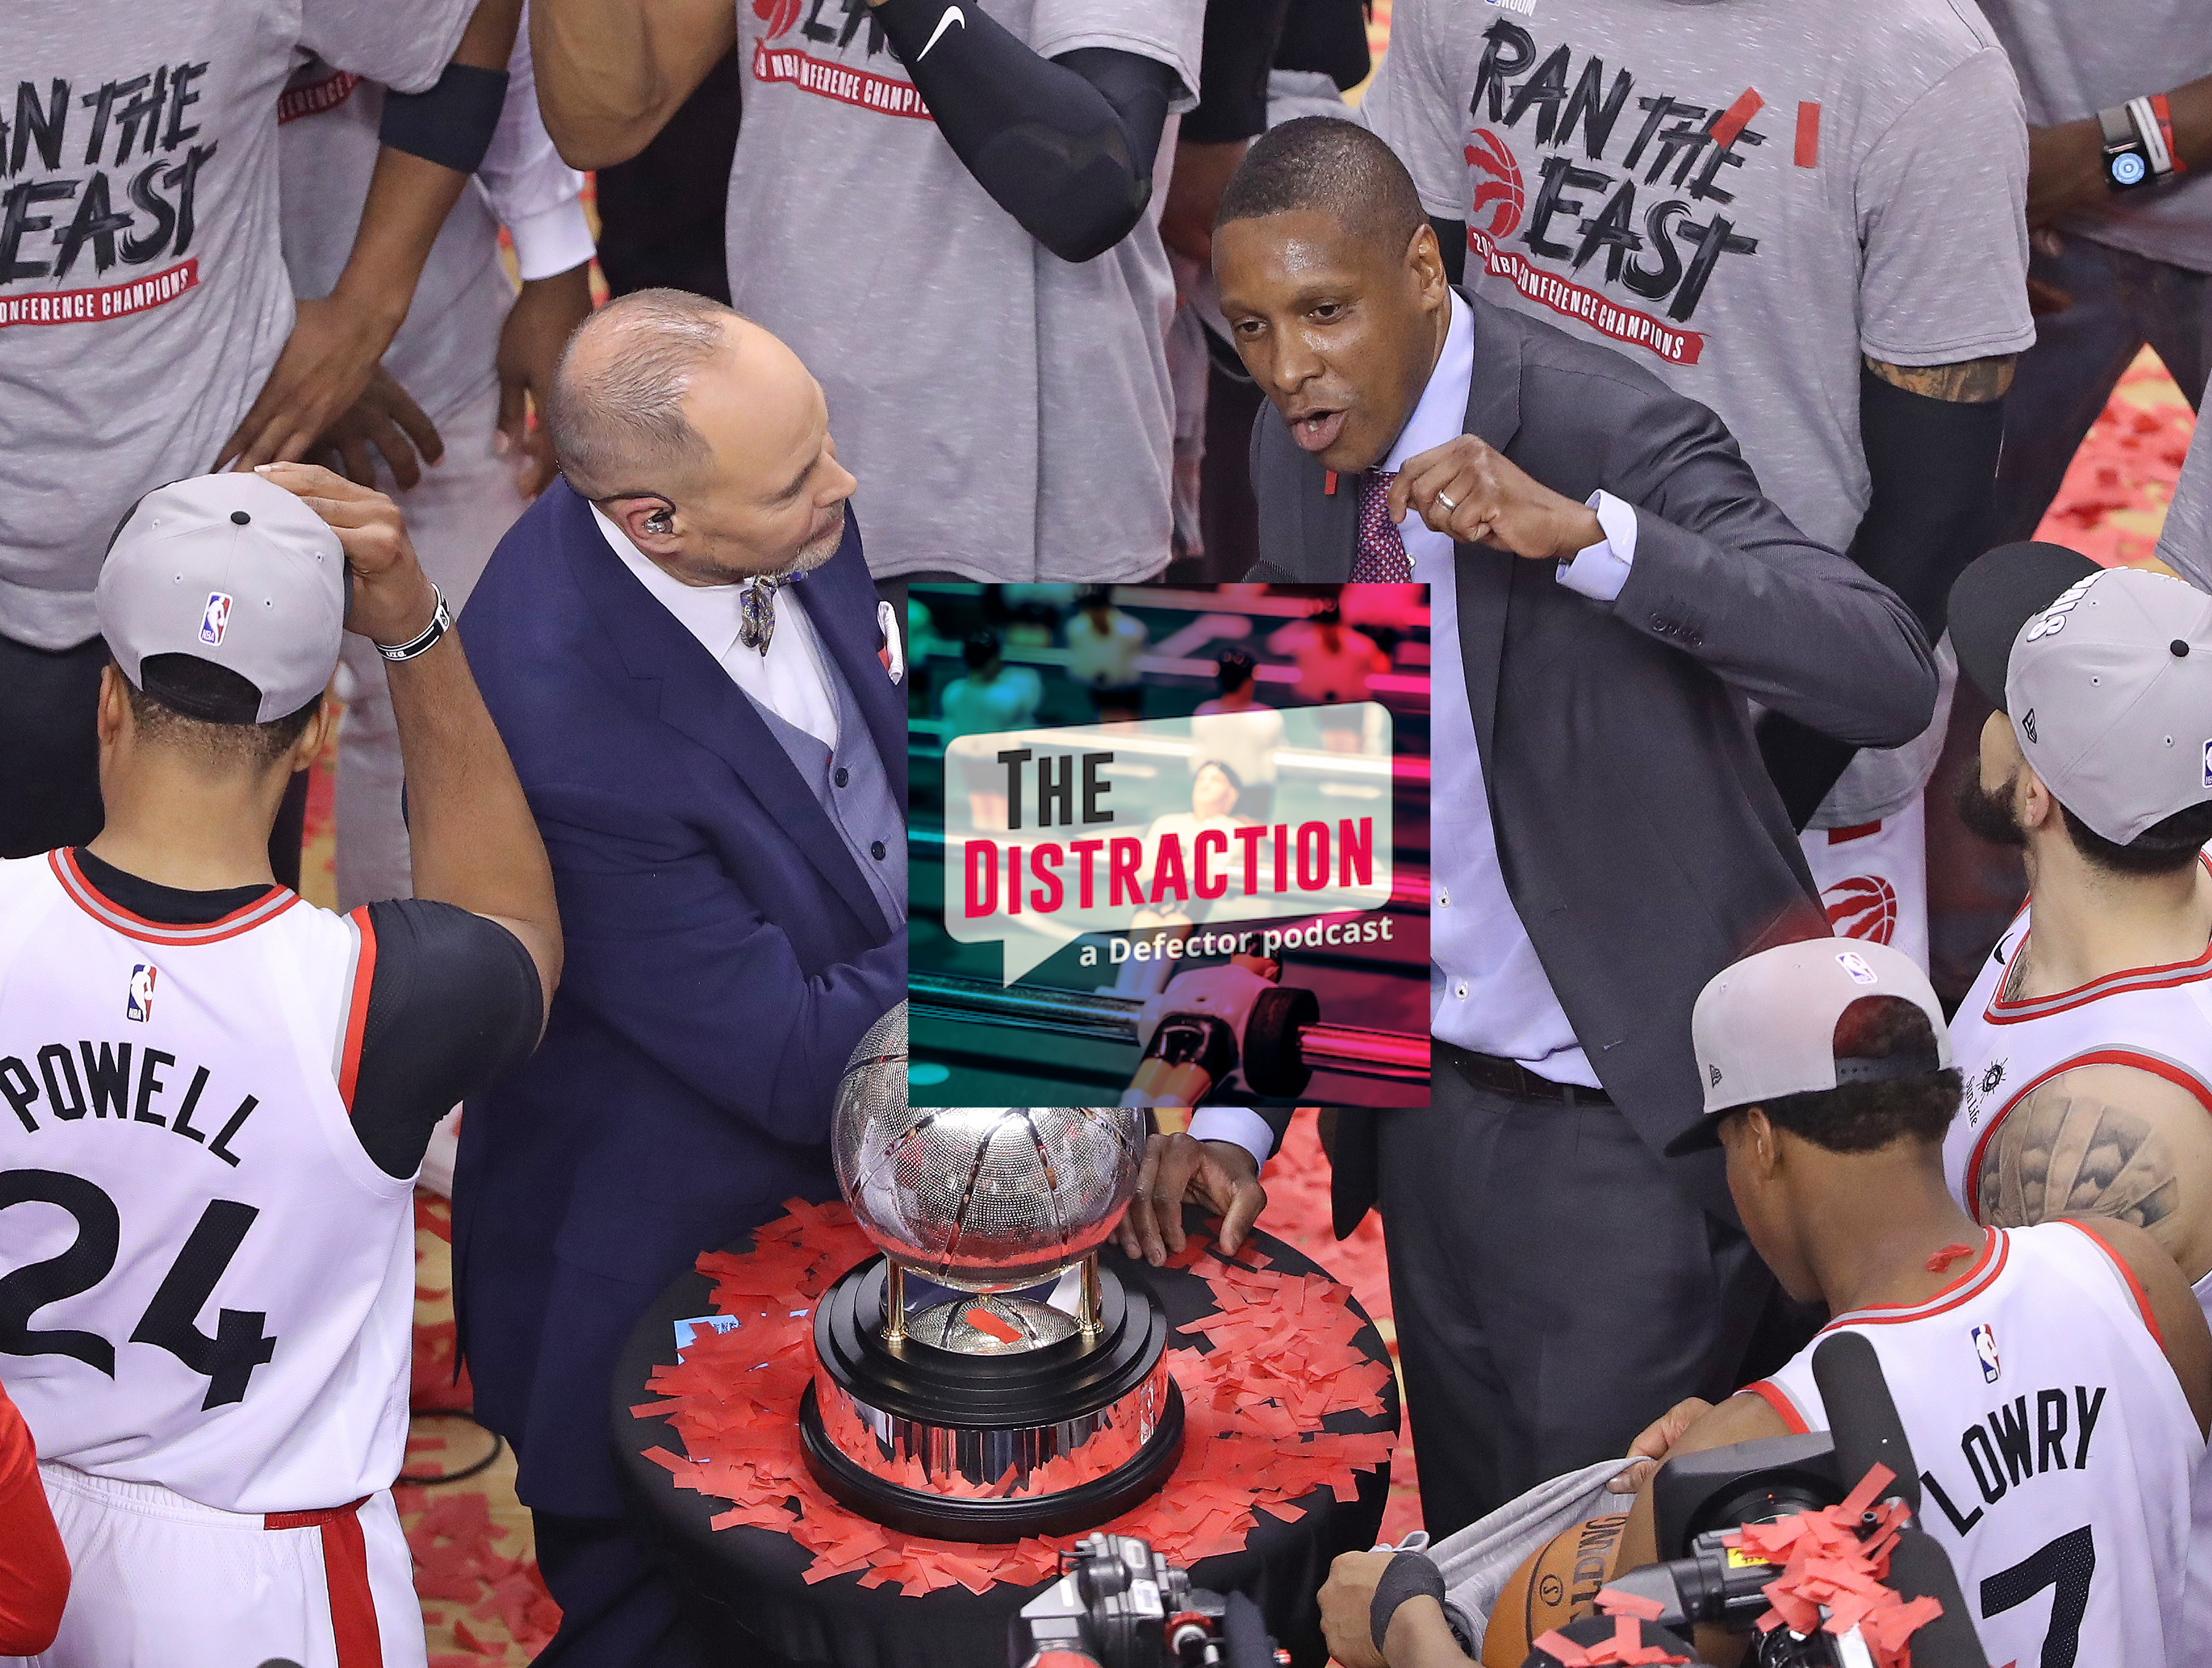 Toronto Raptors GM Masai Ujiri talking to TNT's Ernie Johnson after the Raptors won the Eastern Conference Finals in 2019.